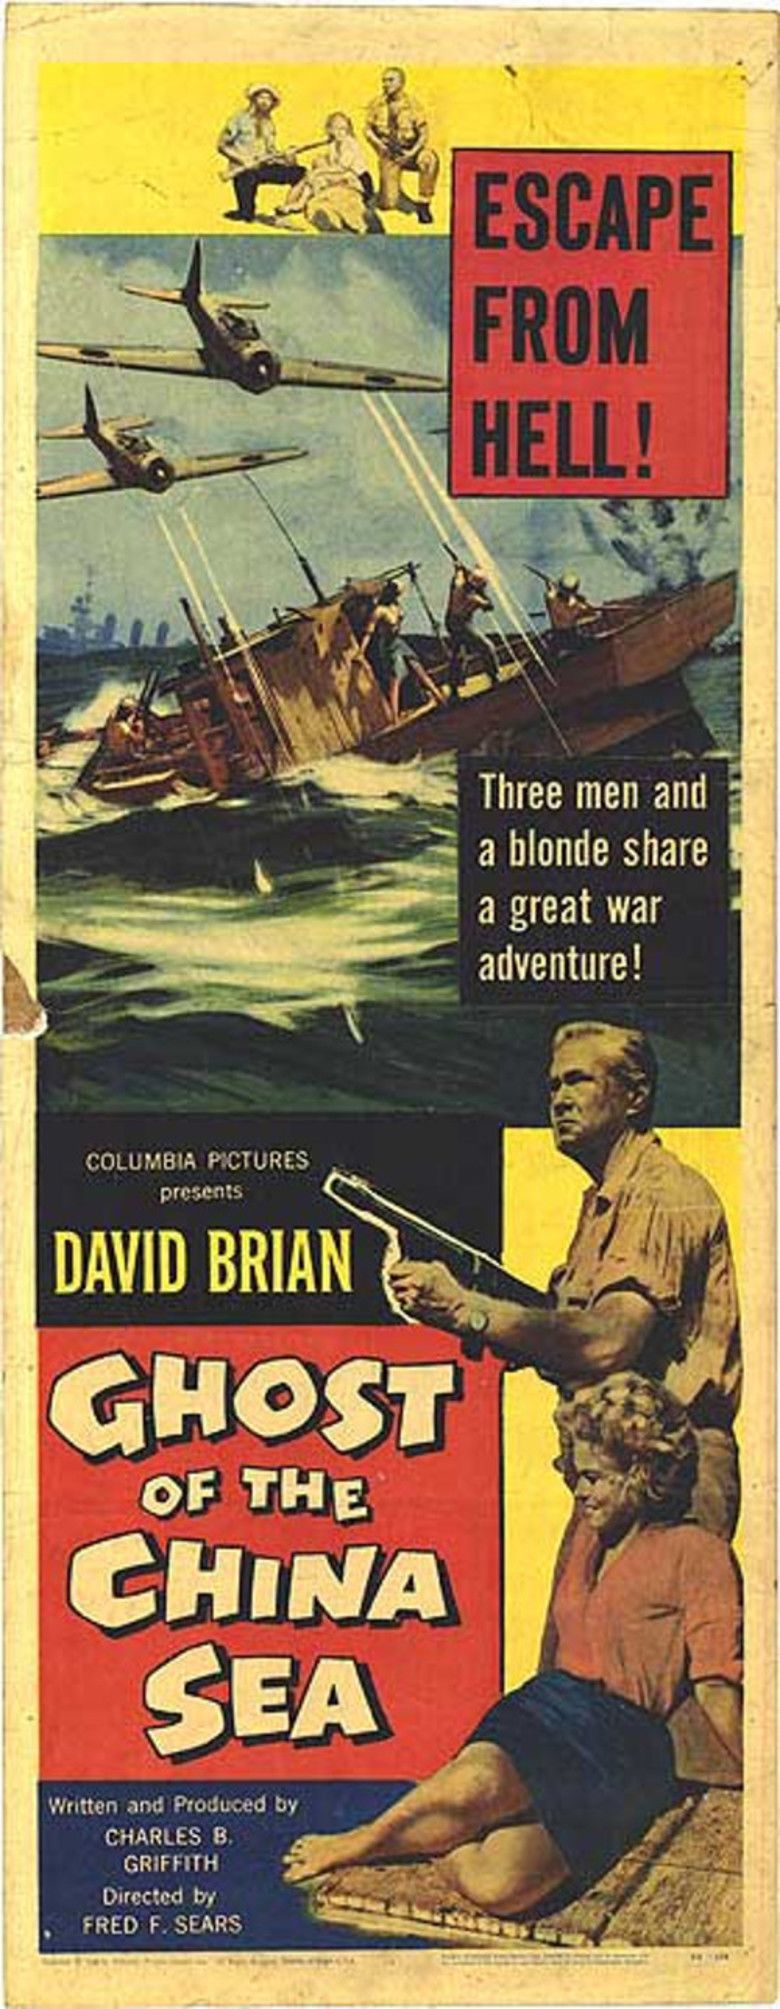 Ghost of the China Sea movie poster